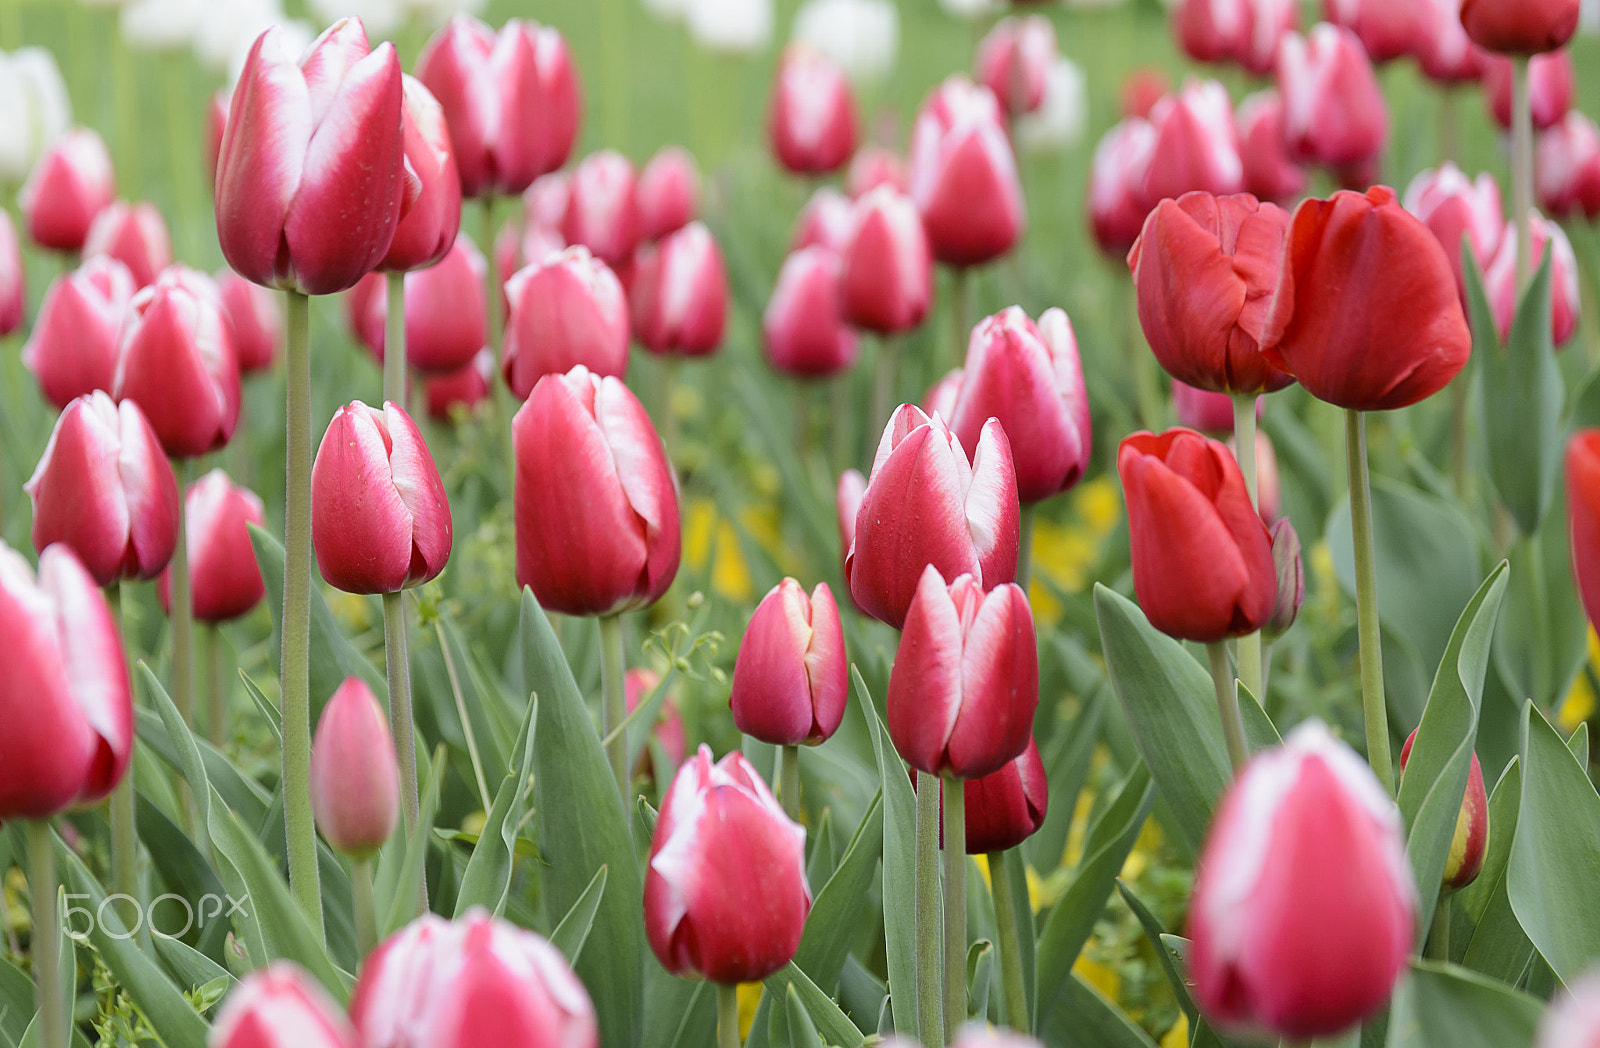 Nikon D7000 sample photo. City garden with red tulips photography